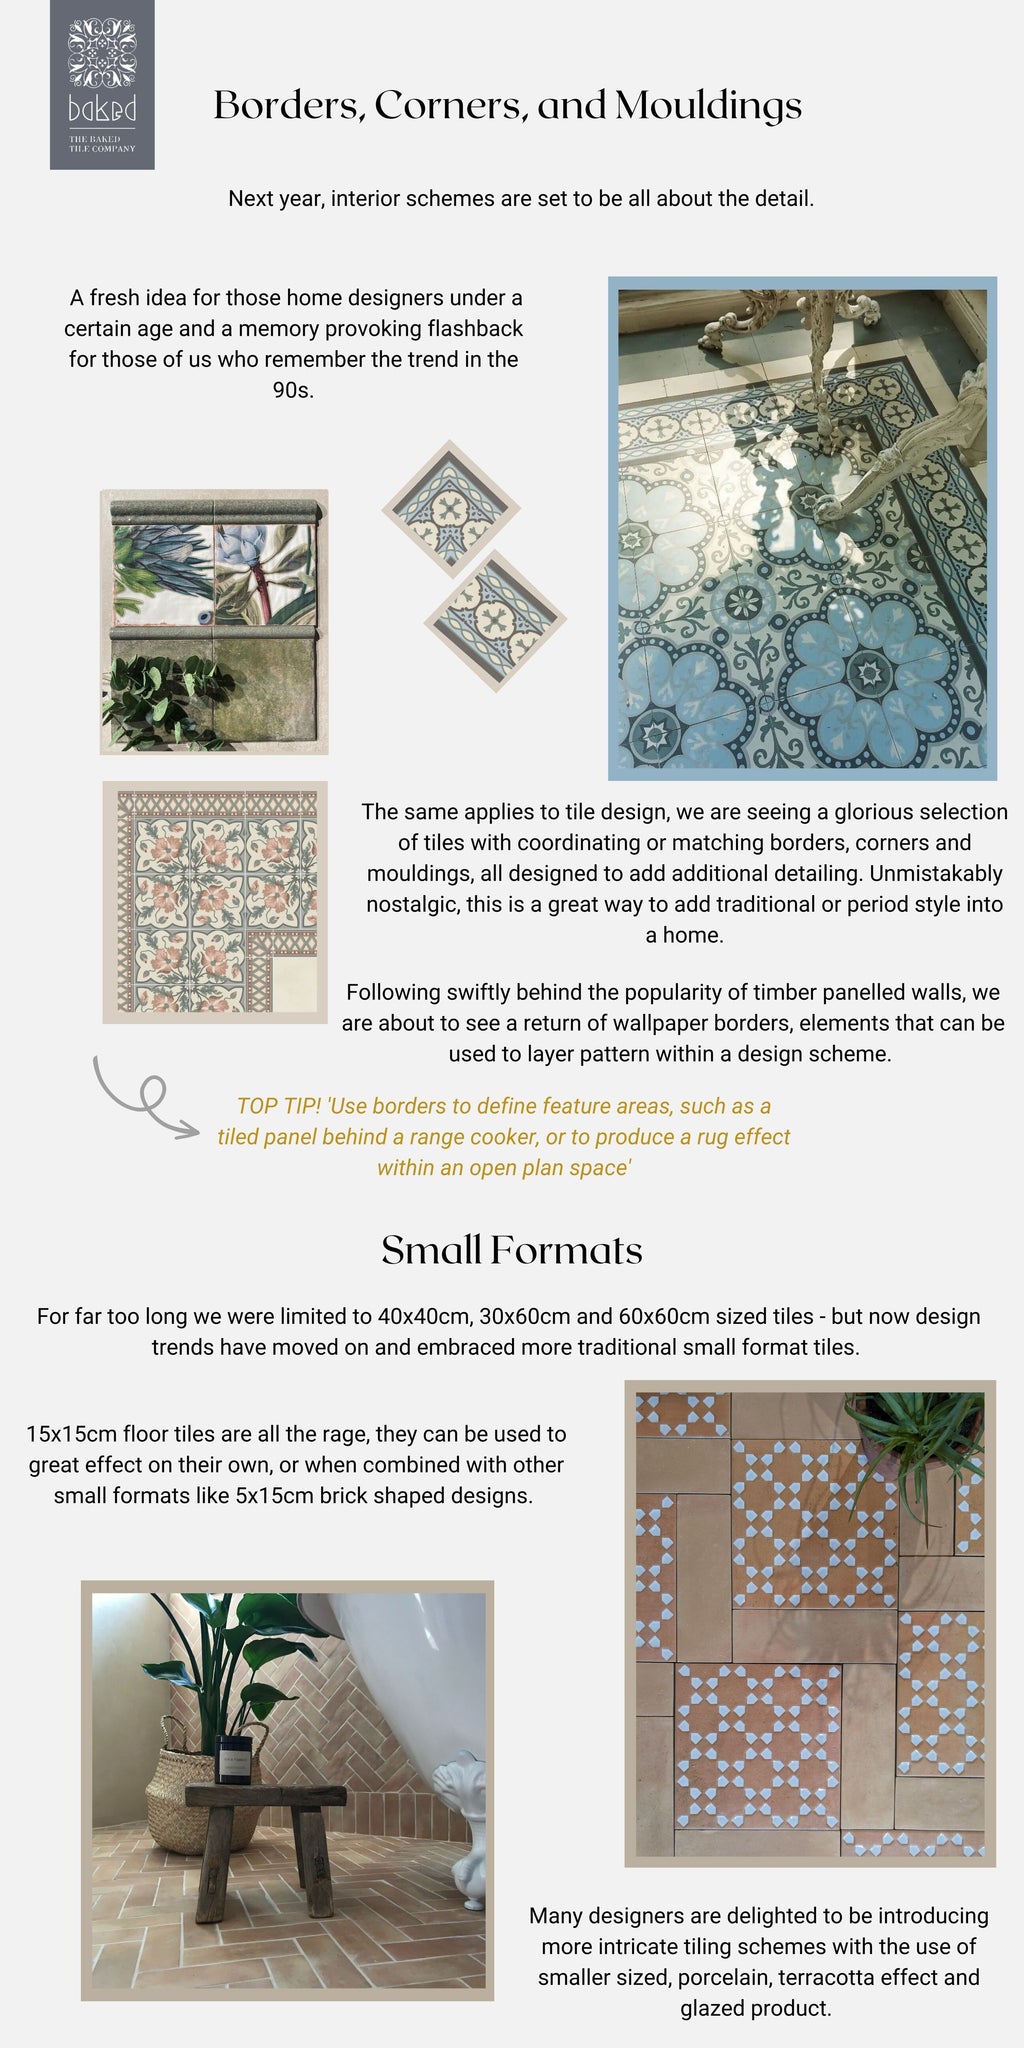 Page two of the Baked Tiles Tile Trends of 2023 - ' Borders, Corners, and Mouldings TOP TIP! 'Use borders to define feature areas, such as a tiled panel behind a range cooker, or to produce a rug effect within an open plan space' Next year, interior schemes are set to be all about the detail. The same applies to tile design, we are seeing a glorious selection of tiles with coordinating or matching borders, corners and mouldings, all designed to add additional detailing. Unmistakably nostalgic, this is a great way to add traditional or period style into a home. A fresh idea for those home designers under a certain age and a memory provoking flashback for those of us who remember the trend in the 90s. Small Formats For far too long we were limited to 40x40cm, 30x60cm and 60x60cm sized tiles - but now design trends have moved on and embraced more traditional small format tiles. 15x15cm floor tiles are all the rage, they can be used to great effect on their own, or when combined with other small formats like 5x15cm brick shaped designs. Many designers are delighted to be introducing more intricate tiling schemes with the use of smaller sized, porcelain, terracotta effect and glazed product. Following swiftly behind the popularity of timber panelled walls, we are about to see a return of wallpaper borders, elements that can be used to layer pattern within a design scheme.'